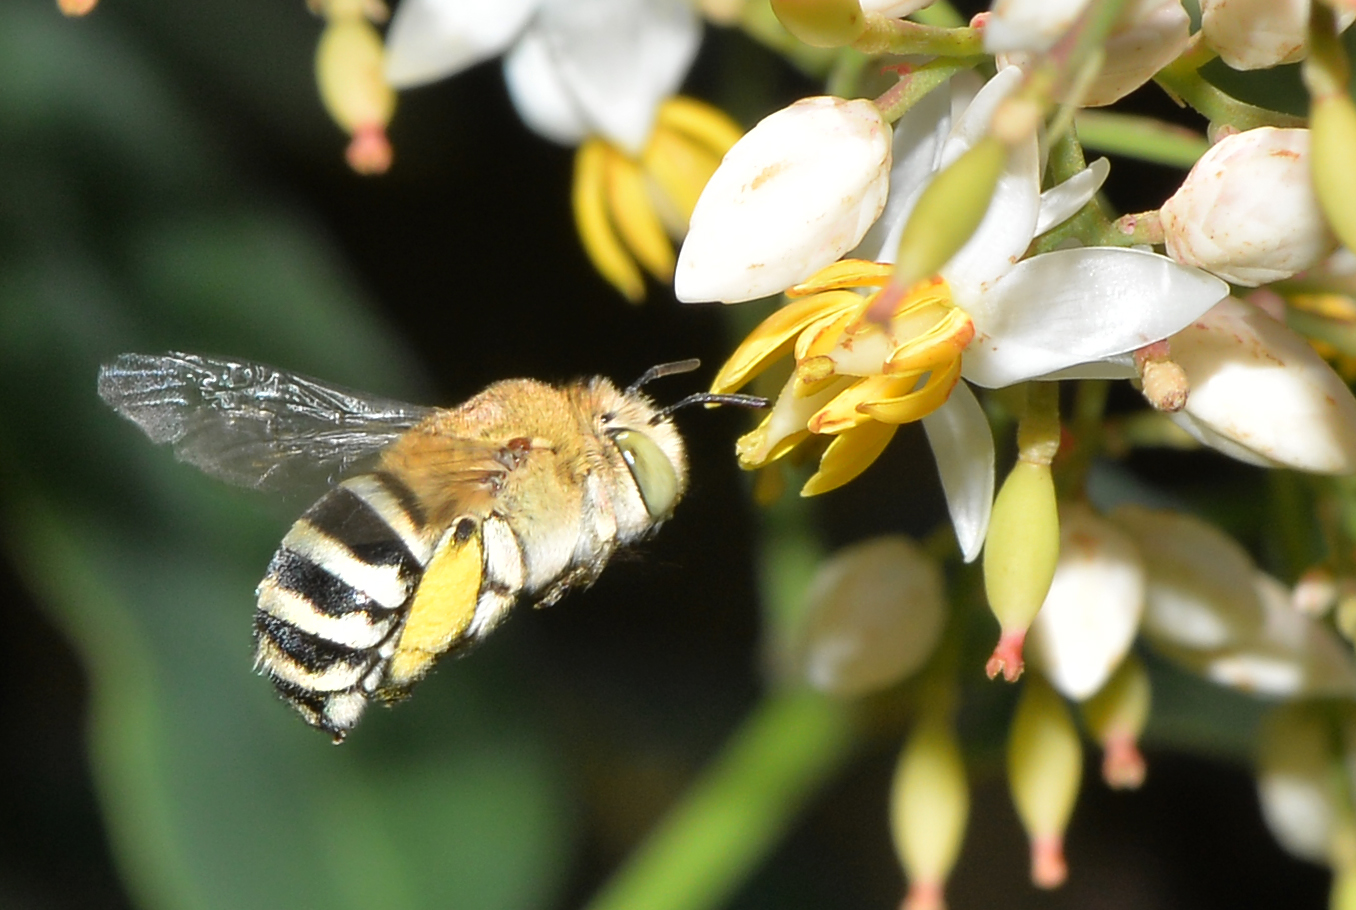 A blue banded bee foraging for pollen near a white flower